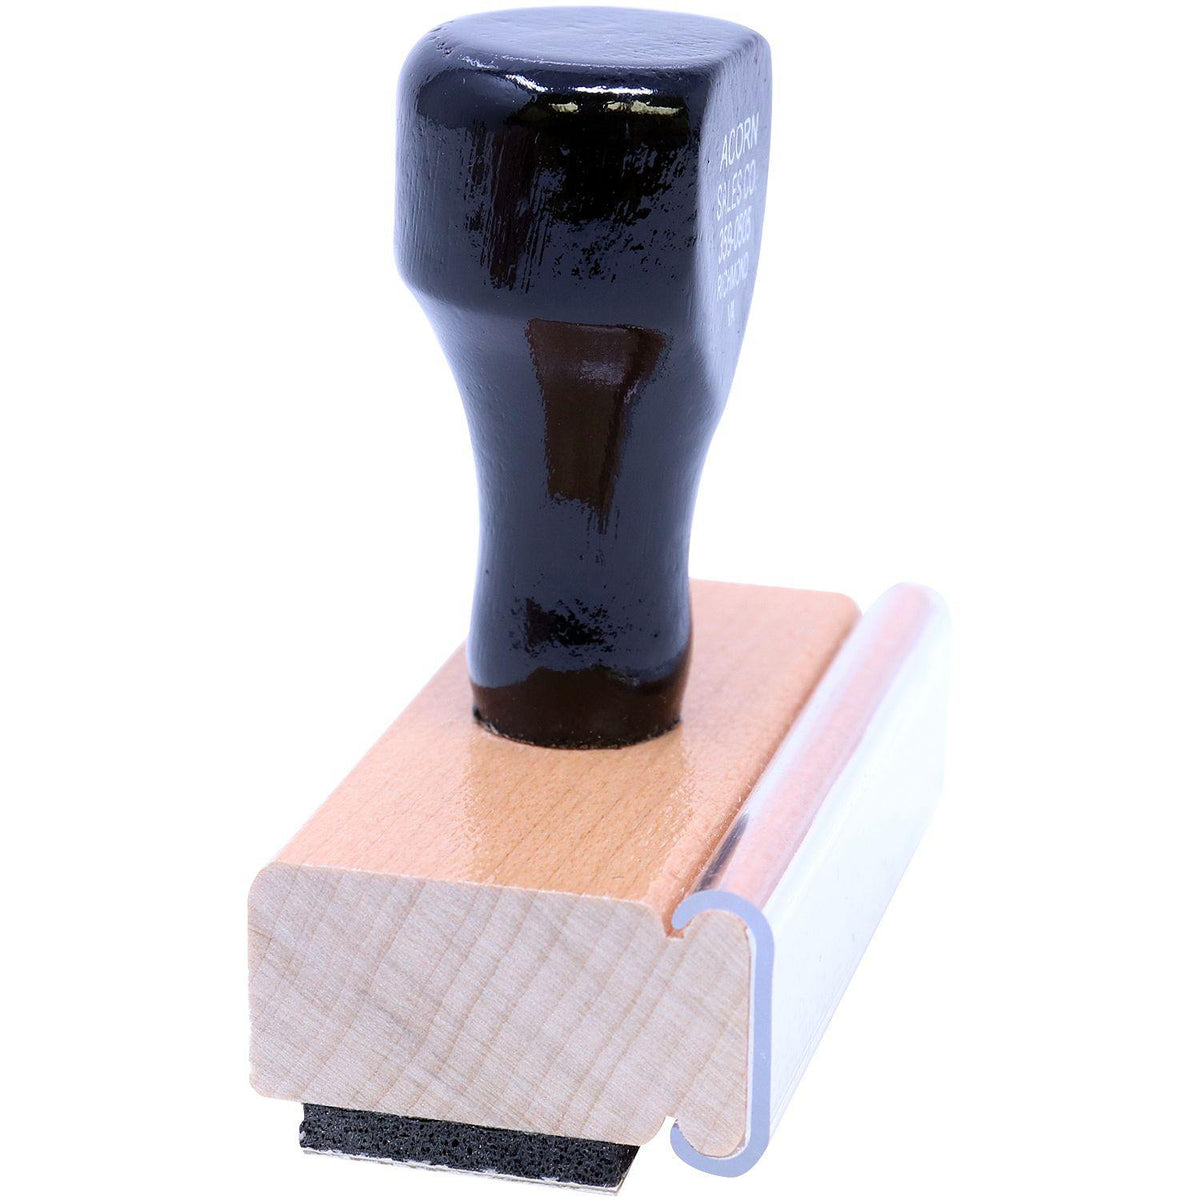 Side View of Large Paid with Ck No Stamp Rubber Stamp at an Angle